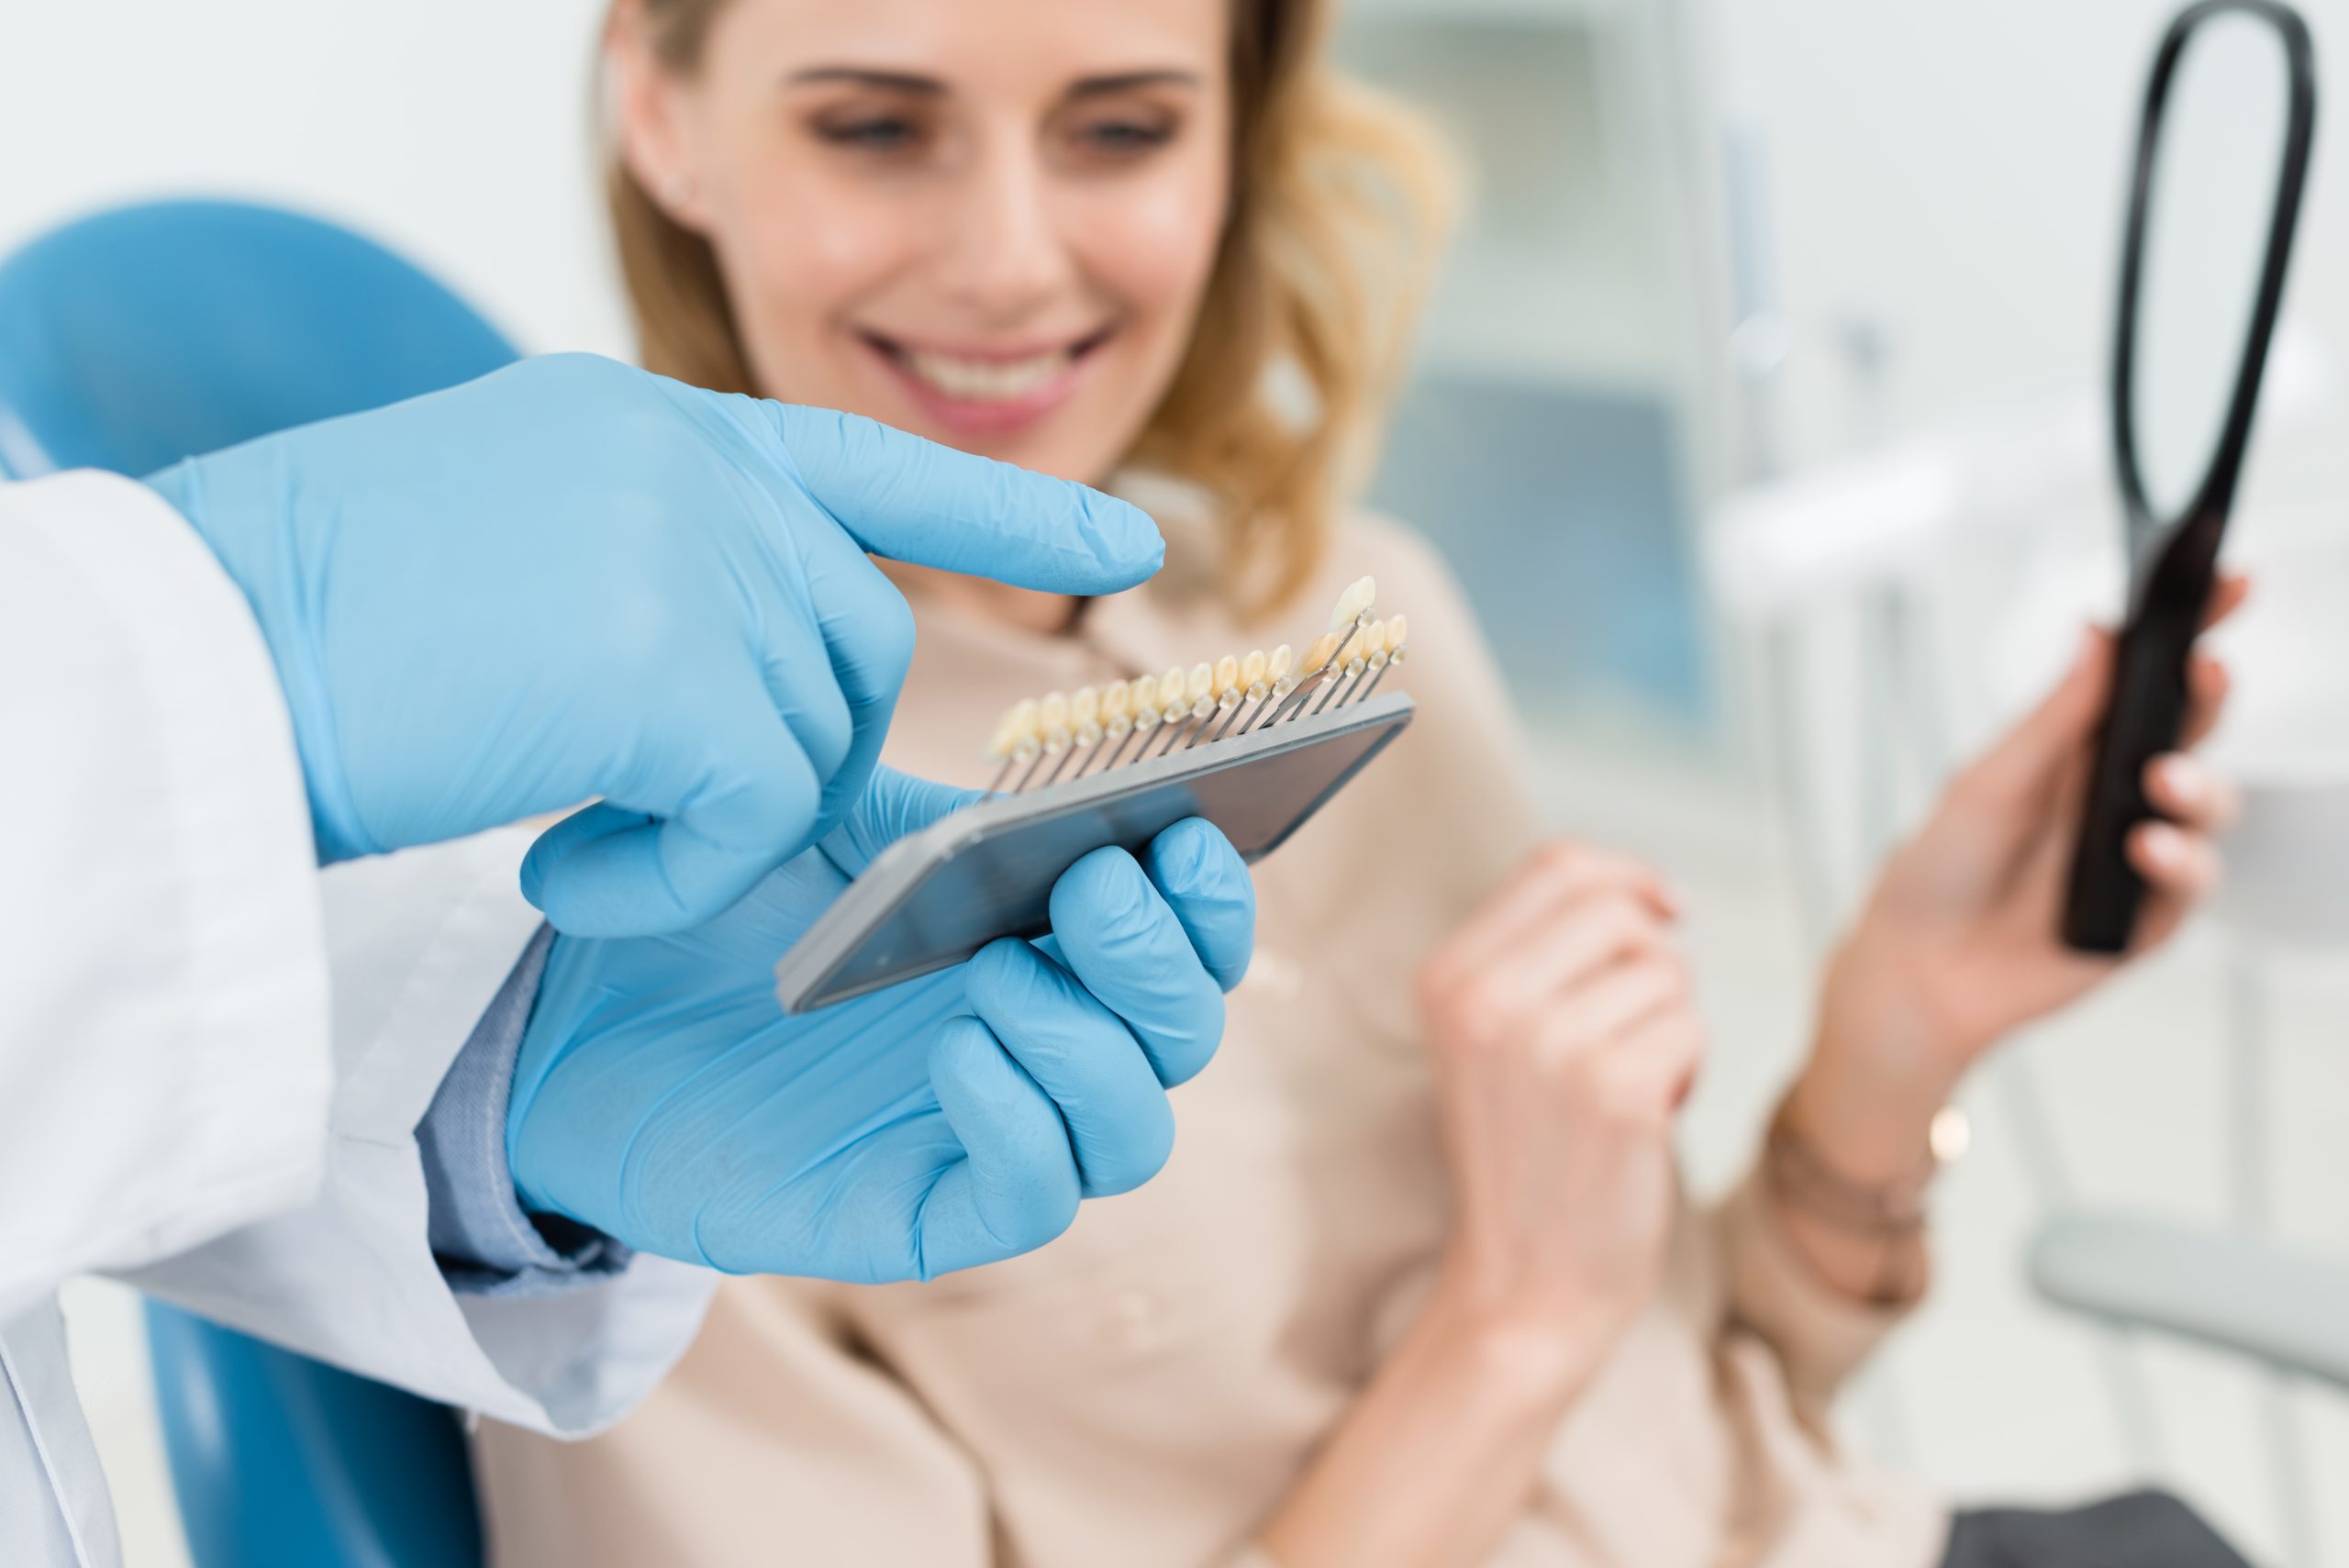 How long does a single dental tooth implant procedure typically take?